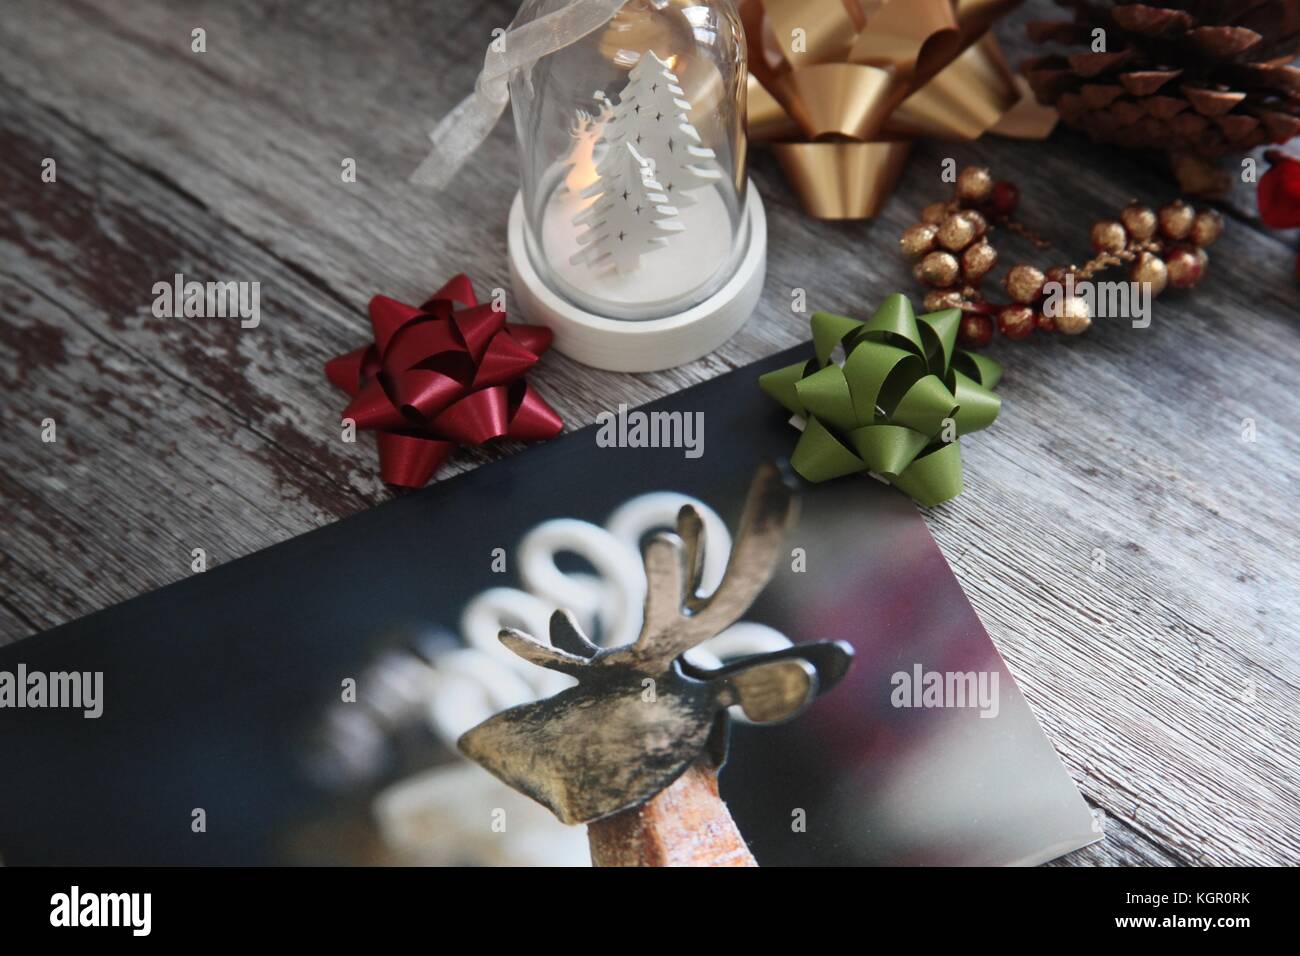 Still life with christmas card, tree decorations and bows Stock Photo